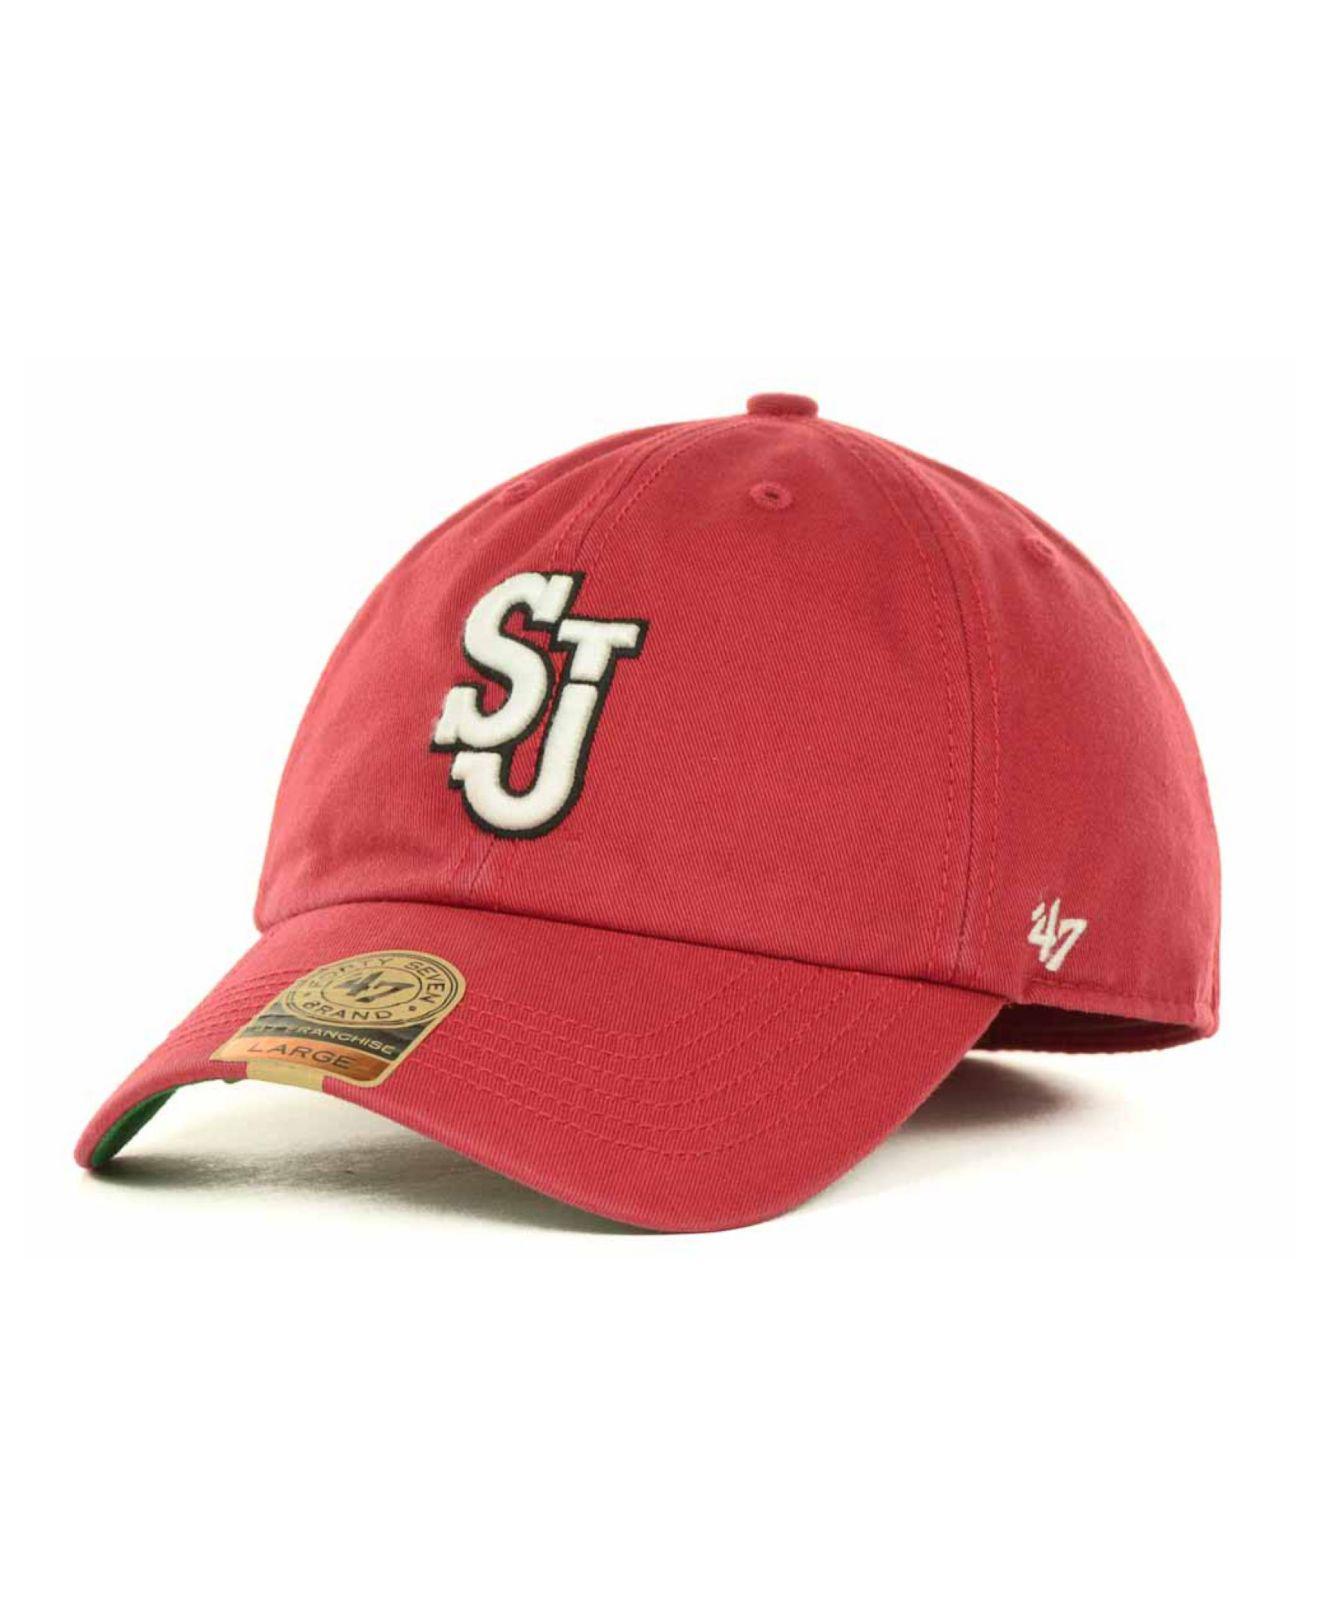 Washington Nationals '47 Team Franchise Fitted Hat - Red